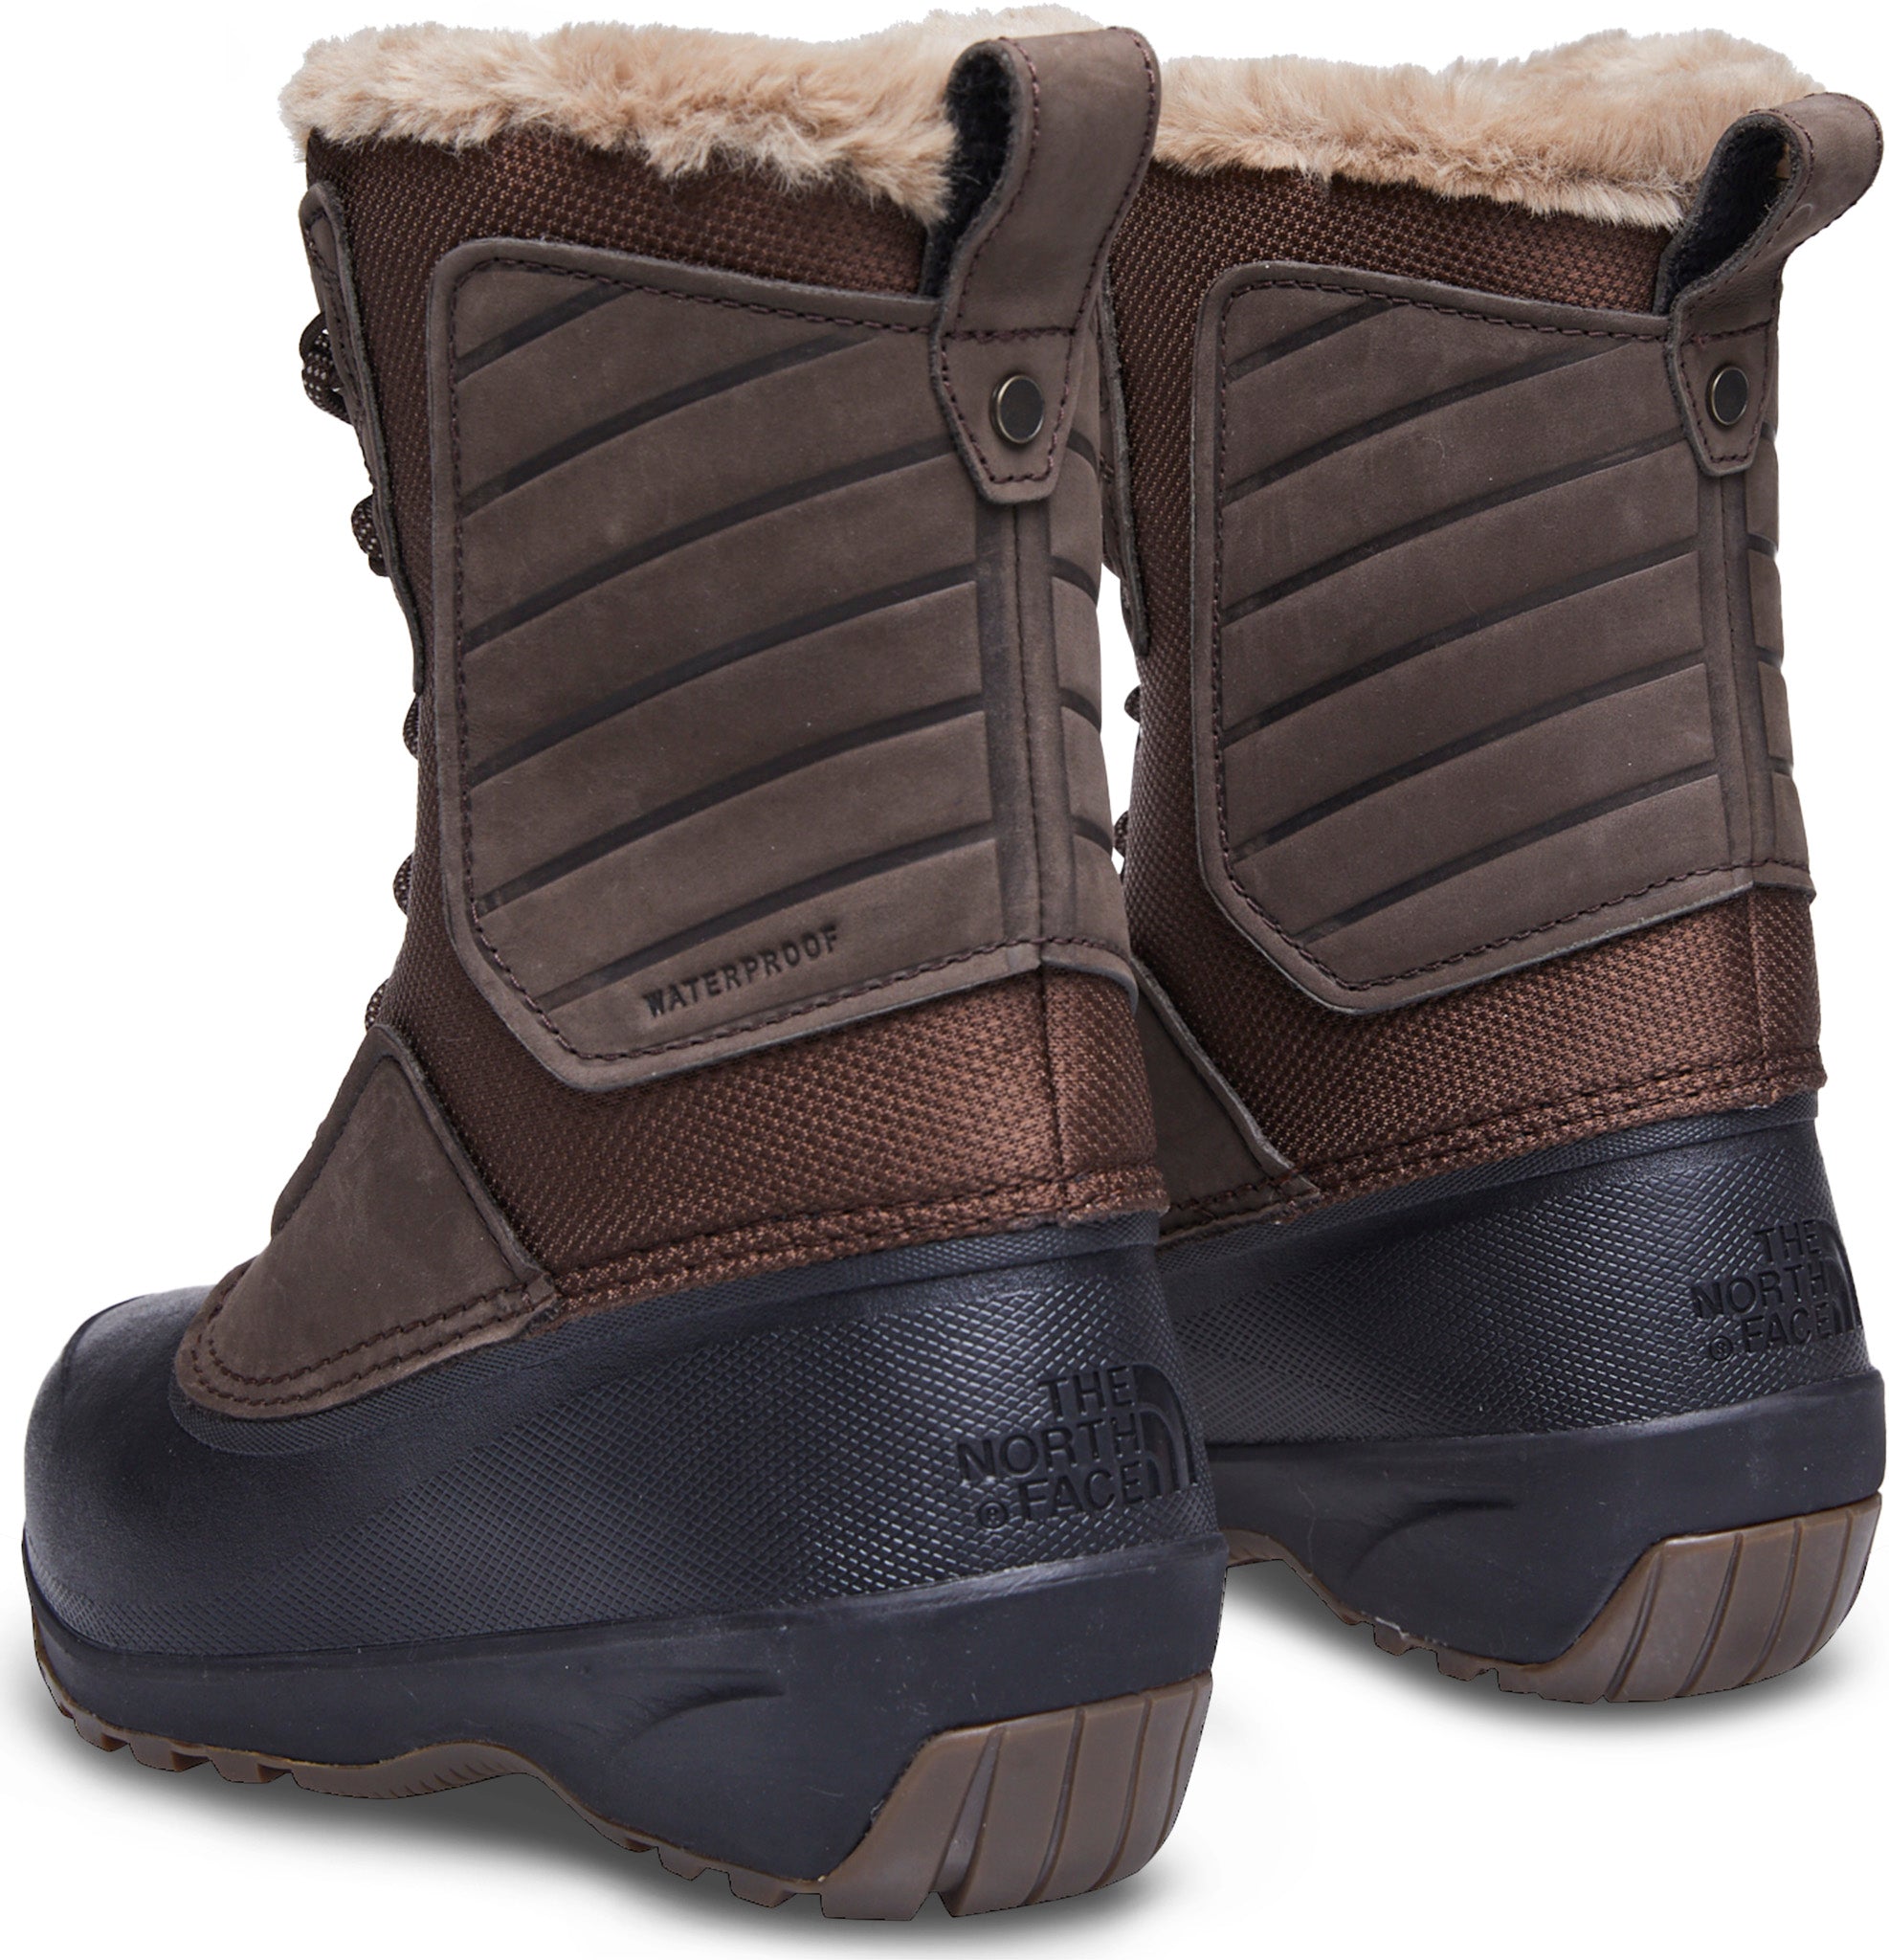 The North Face Shellista IV Mid Waterproof Boots - Women's 